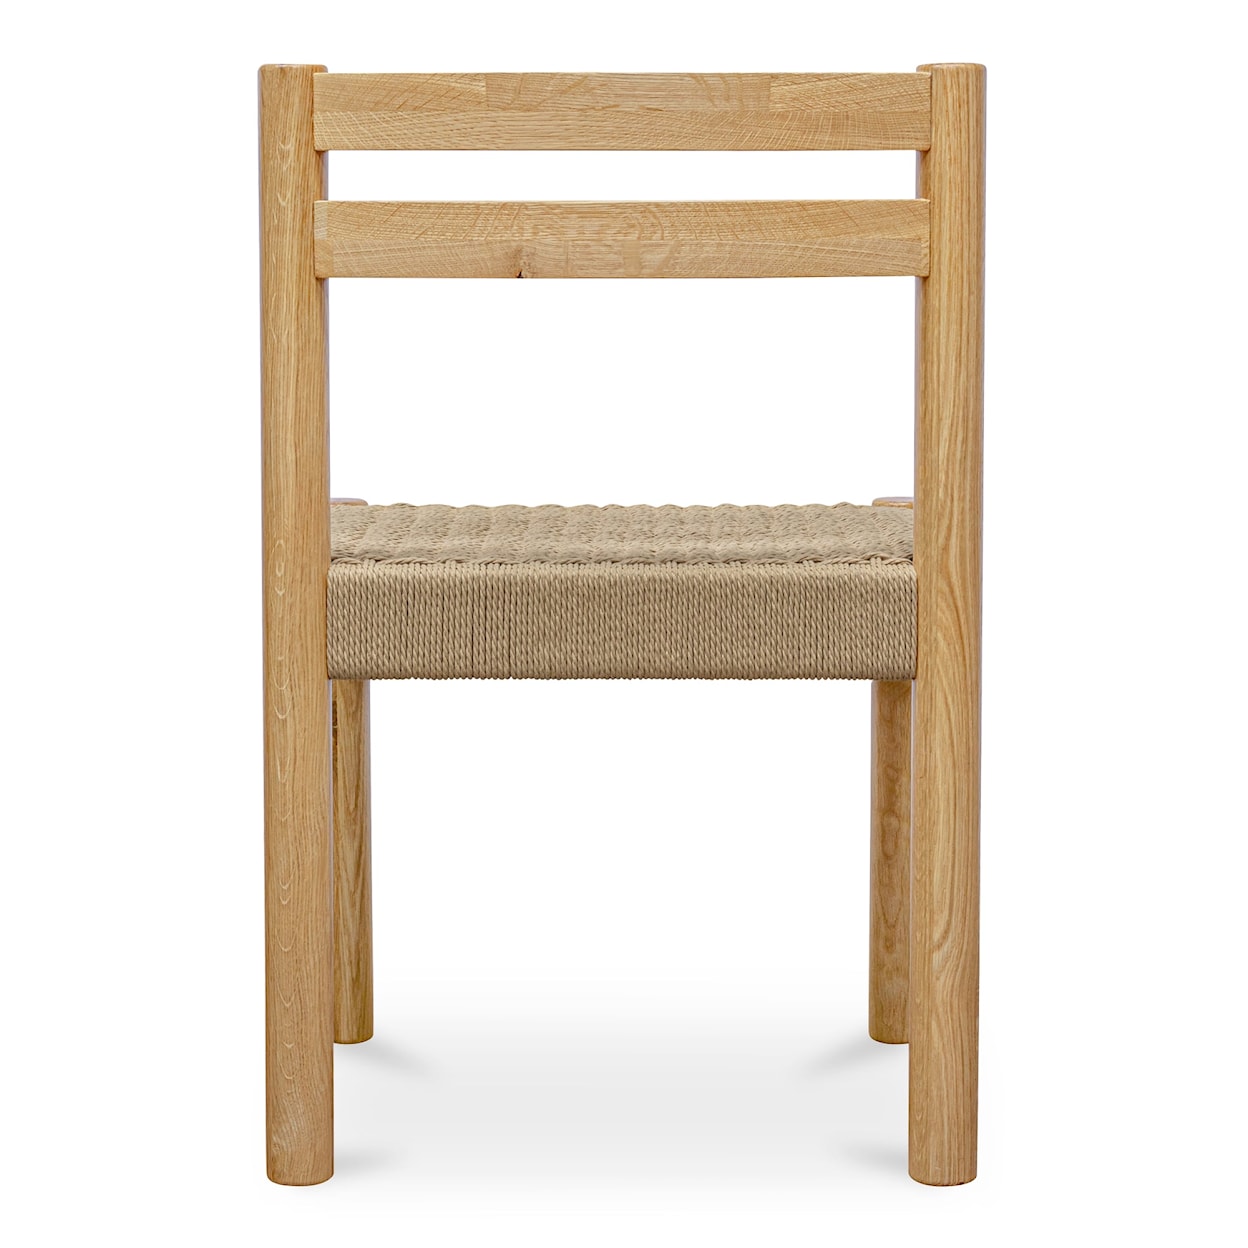 Moe's Home Collection Finn Side Dining Chairs